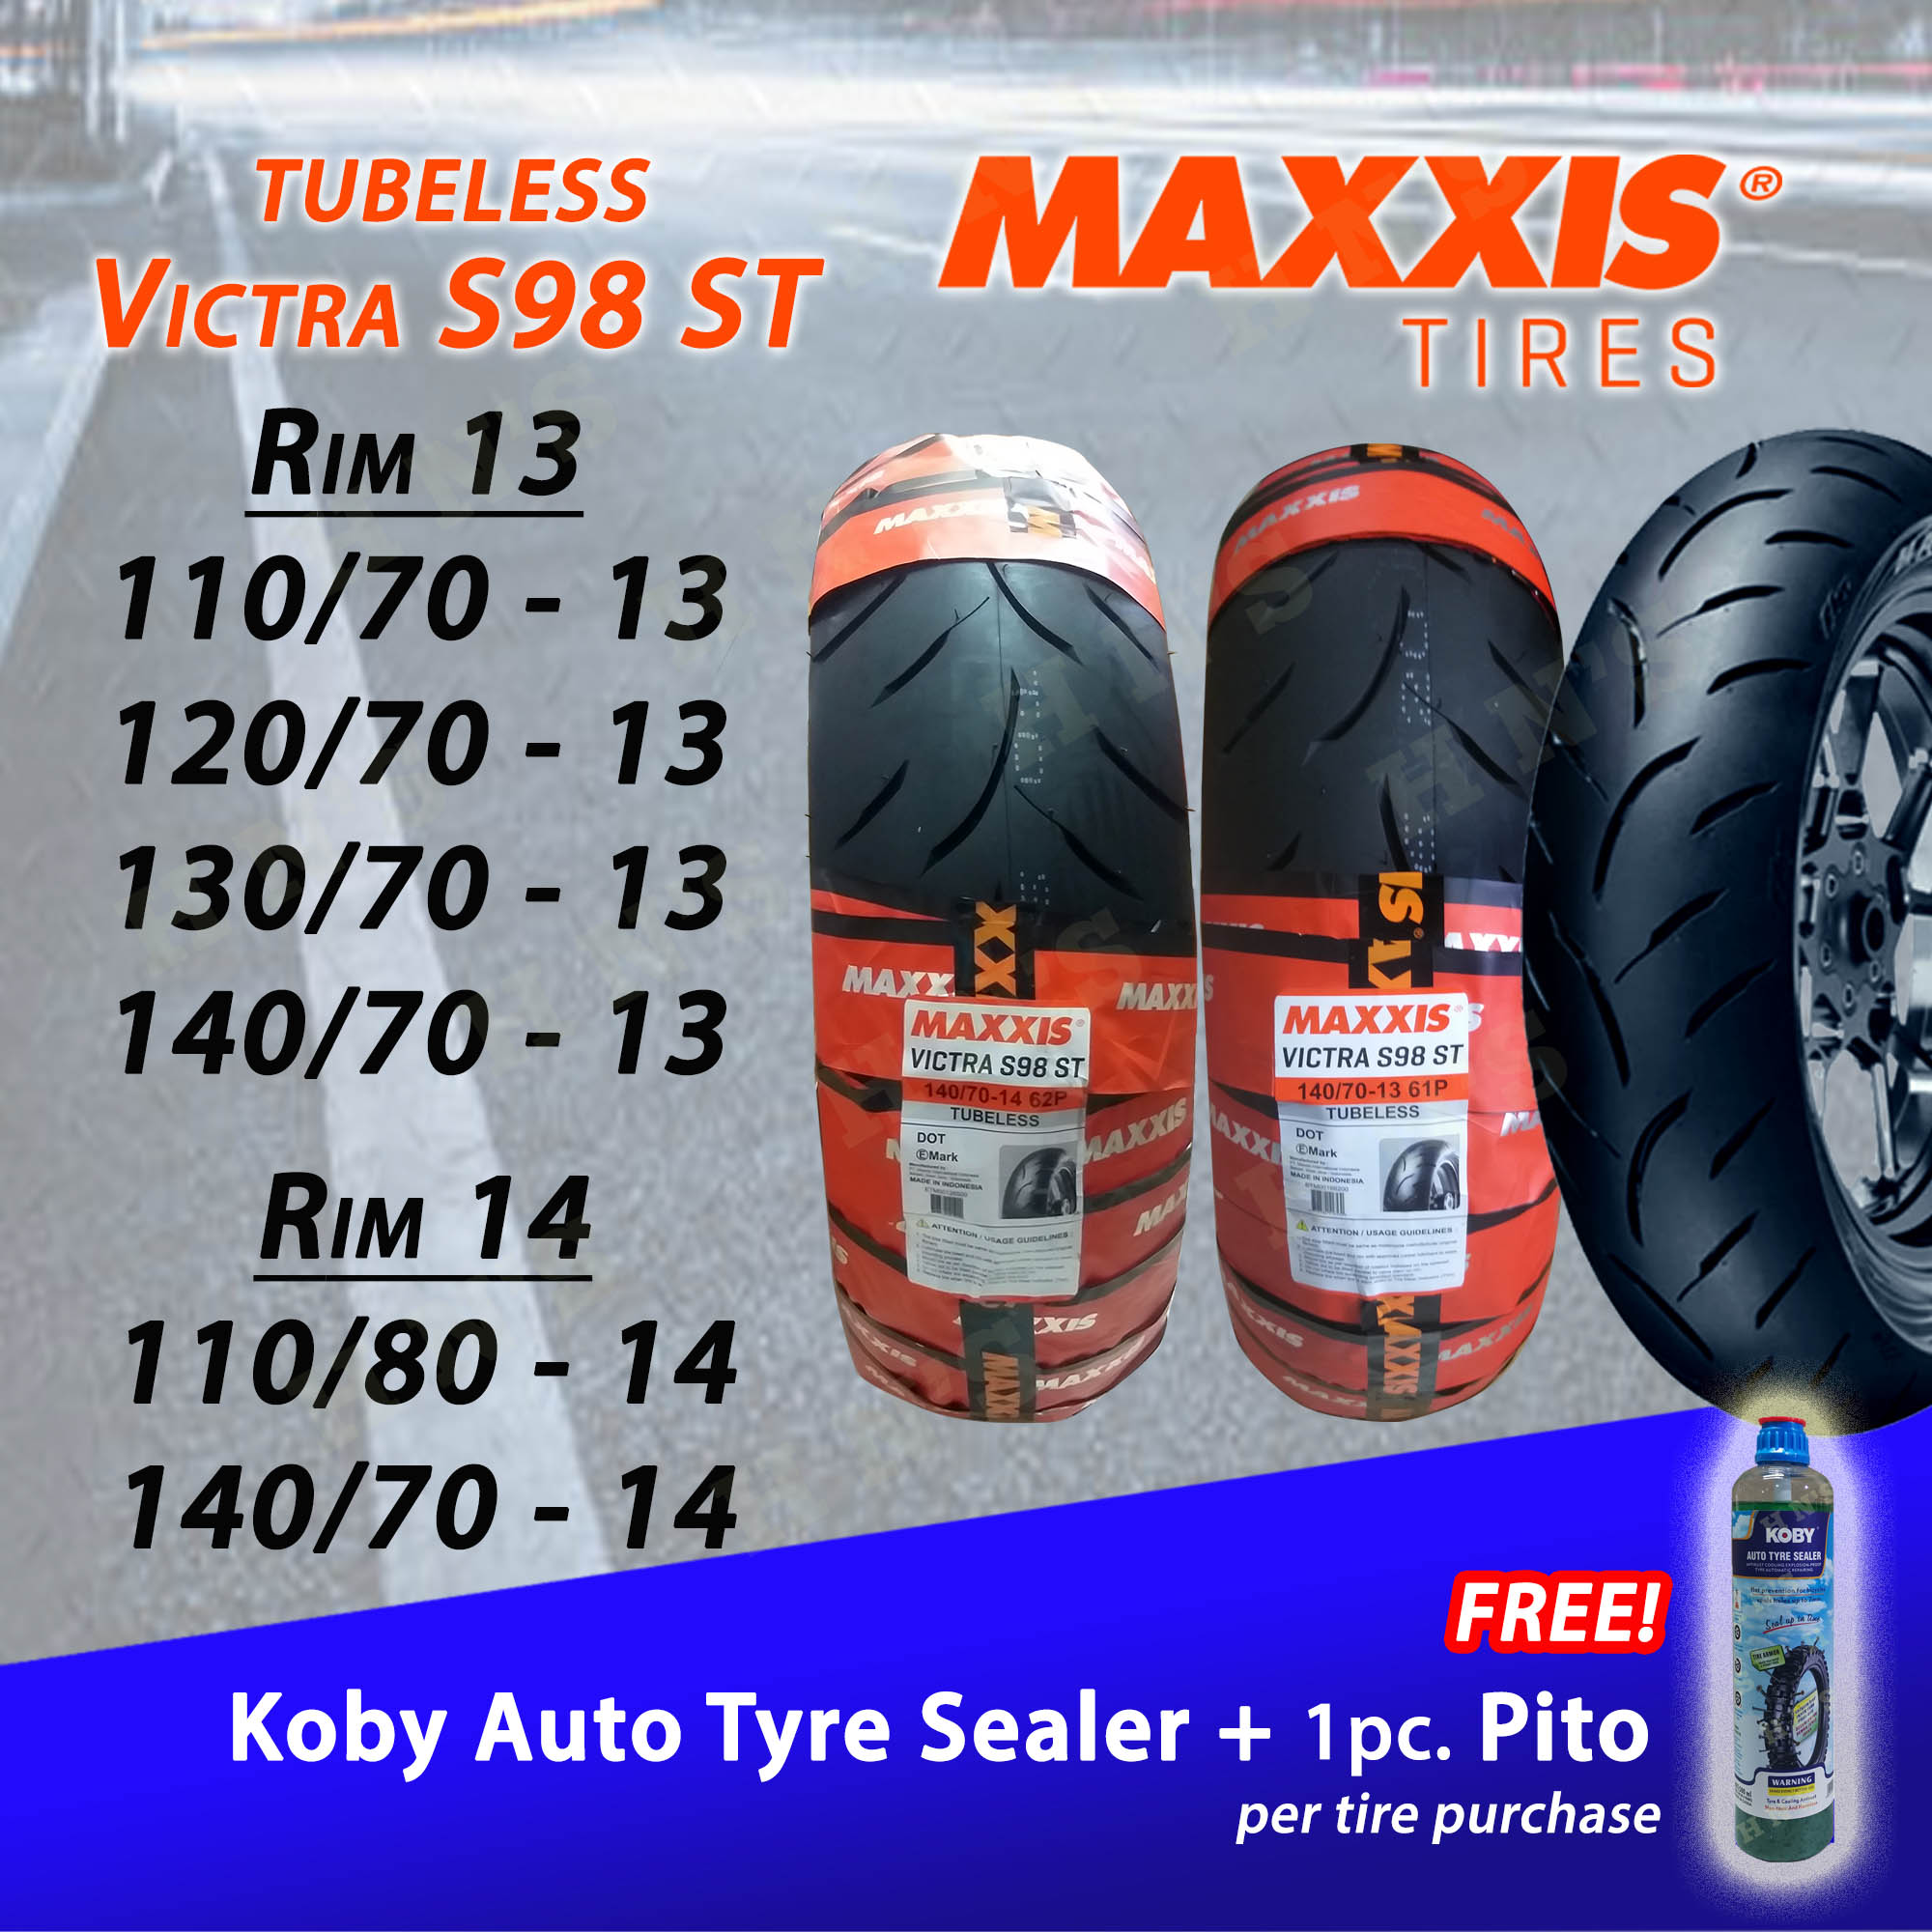 MAXXIS Victra Tubeless Tires RIM 13 14 with Free Sealant